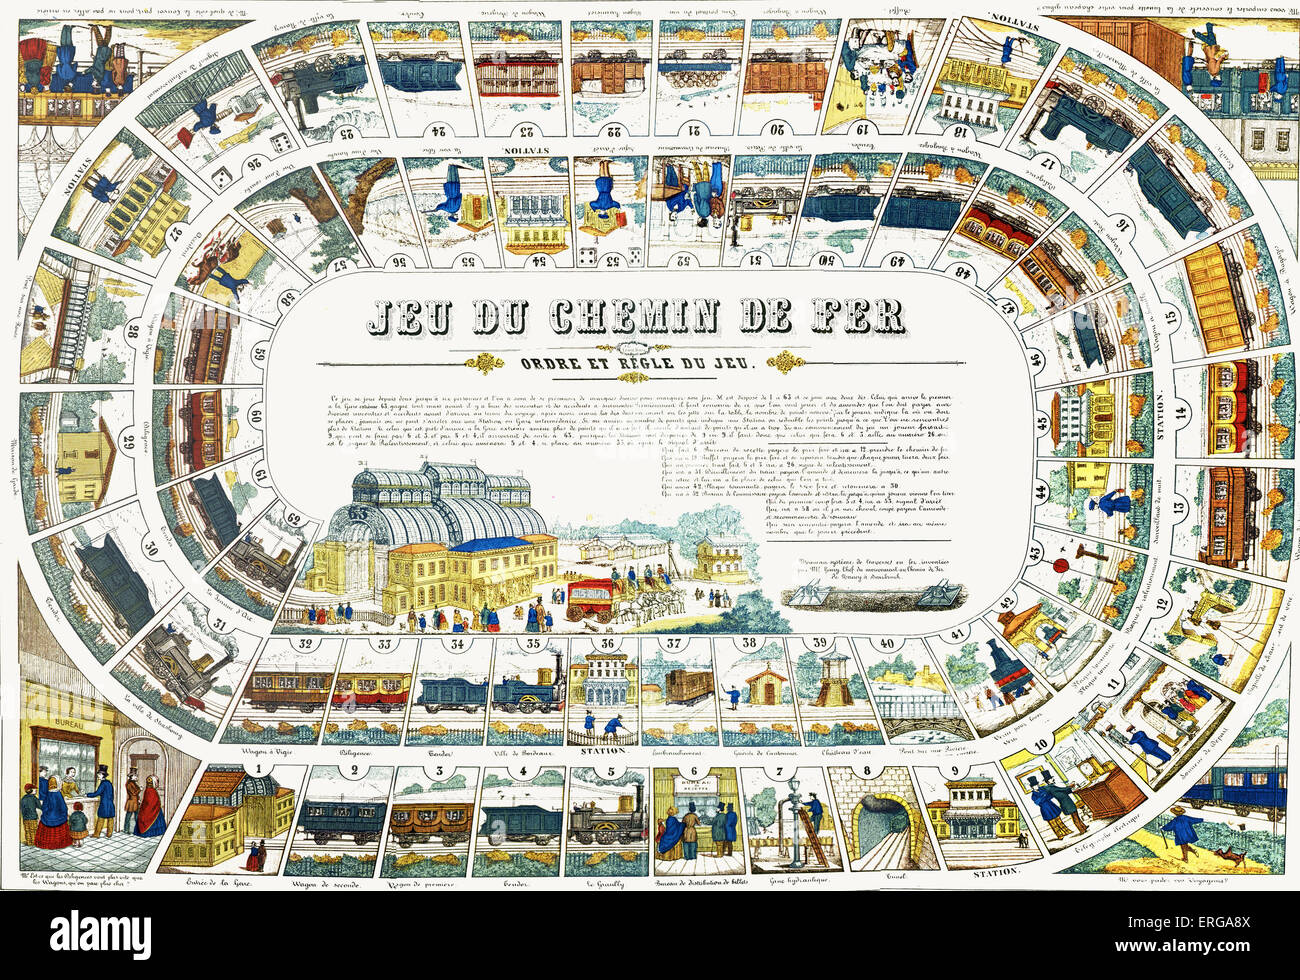 Board and rules for railway game - Jeu du Chemin de fer. France, 19th century. Stock Photo